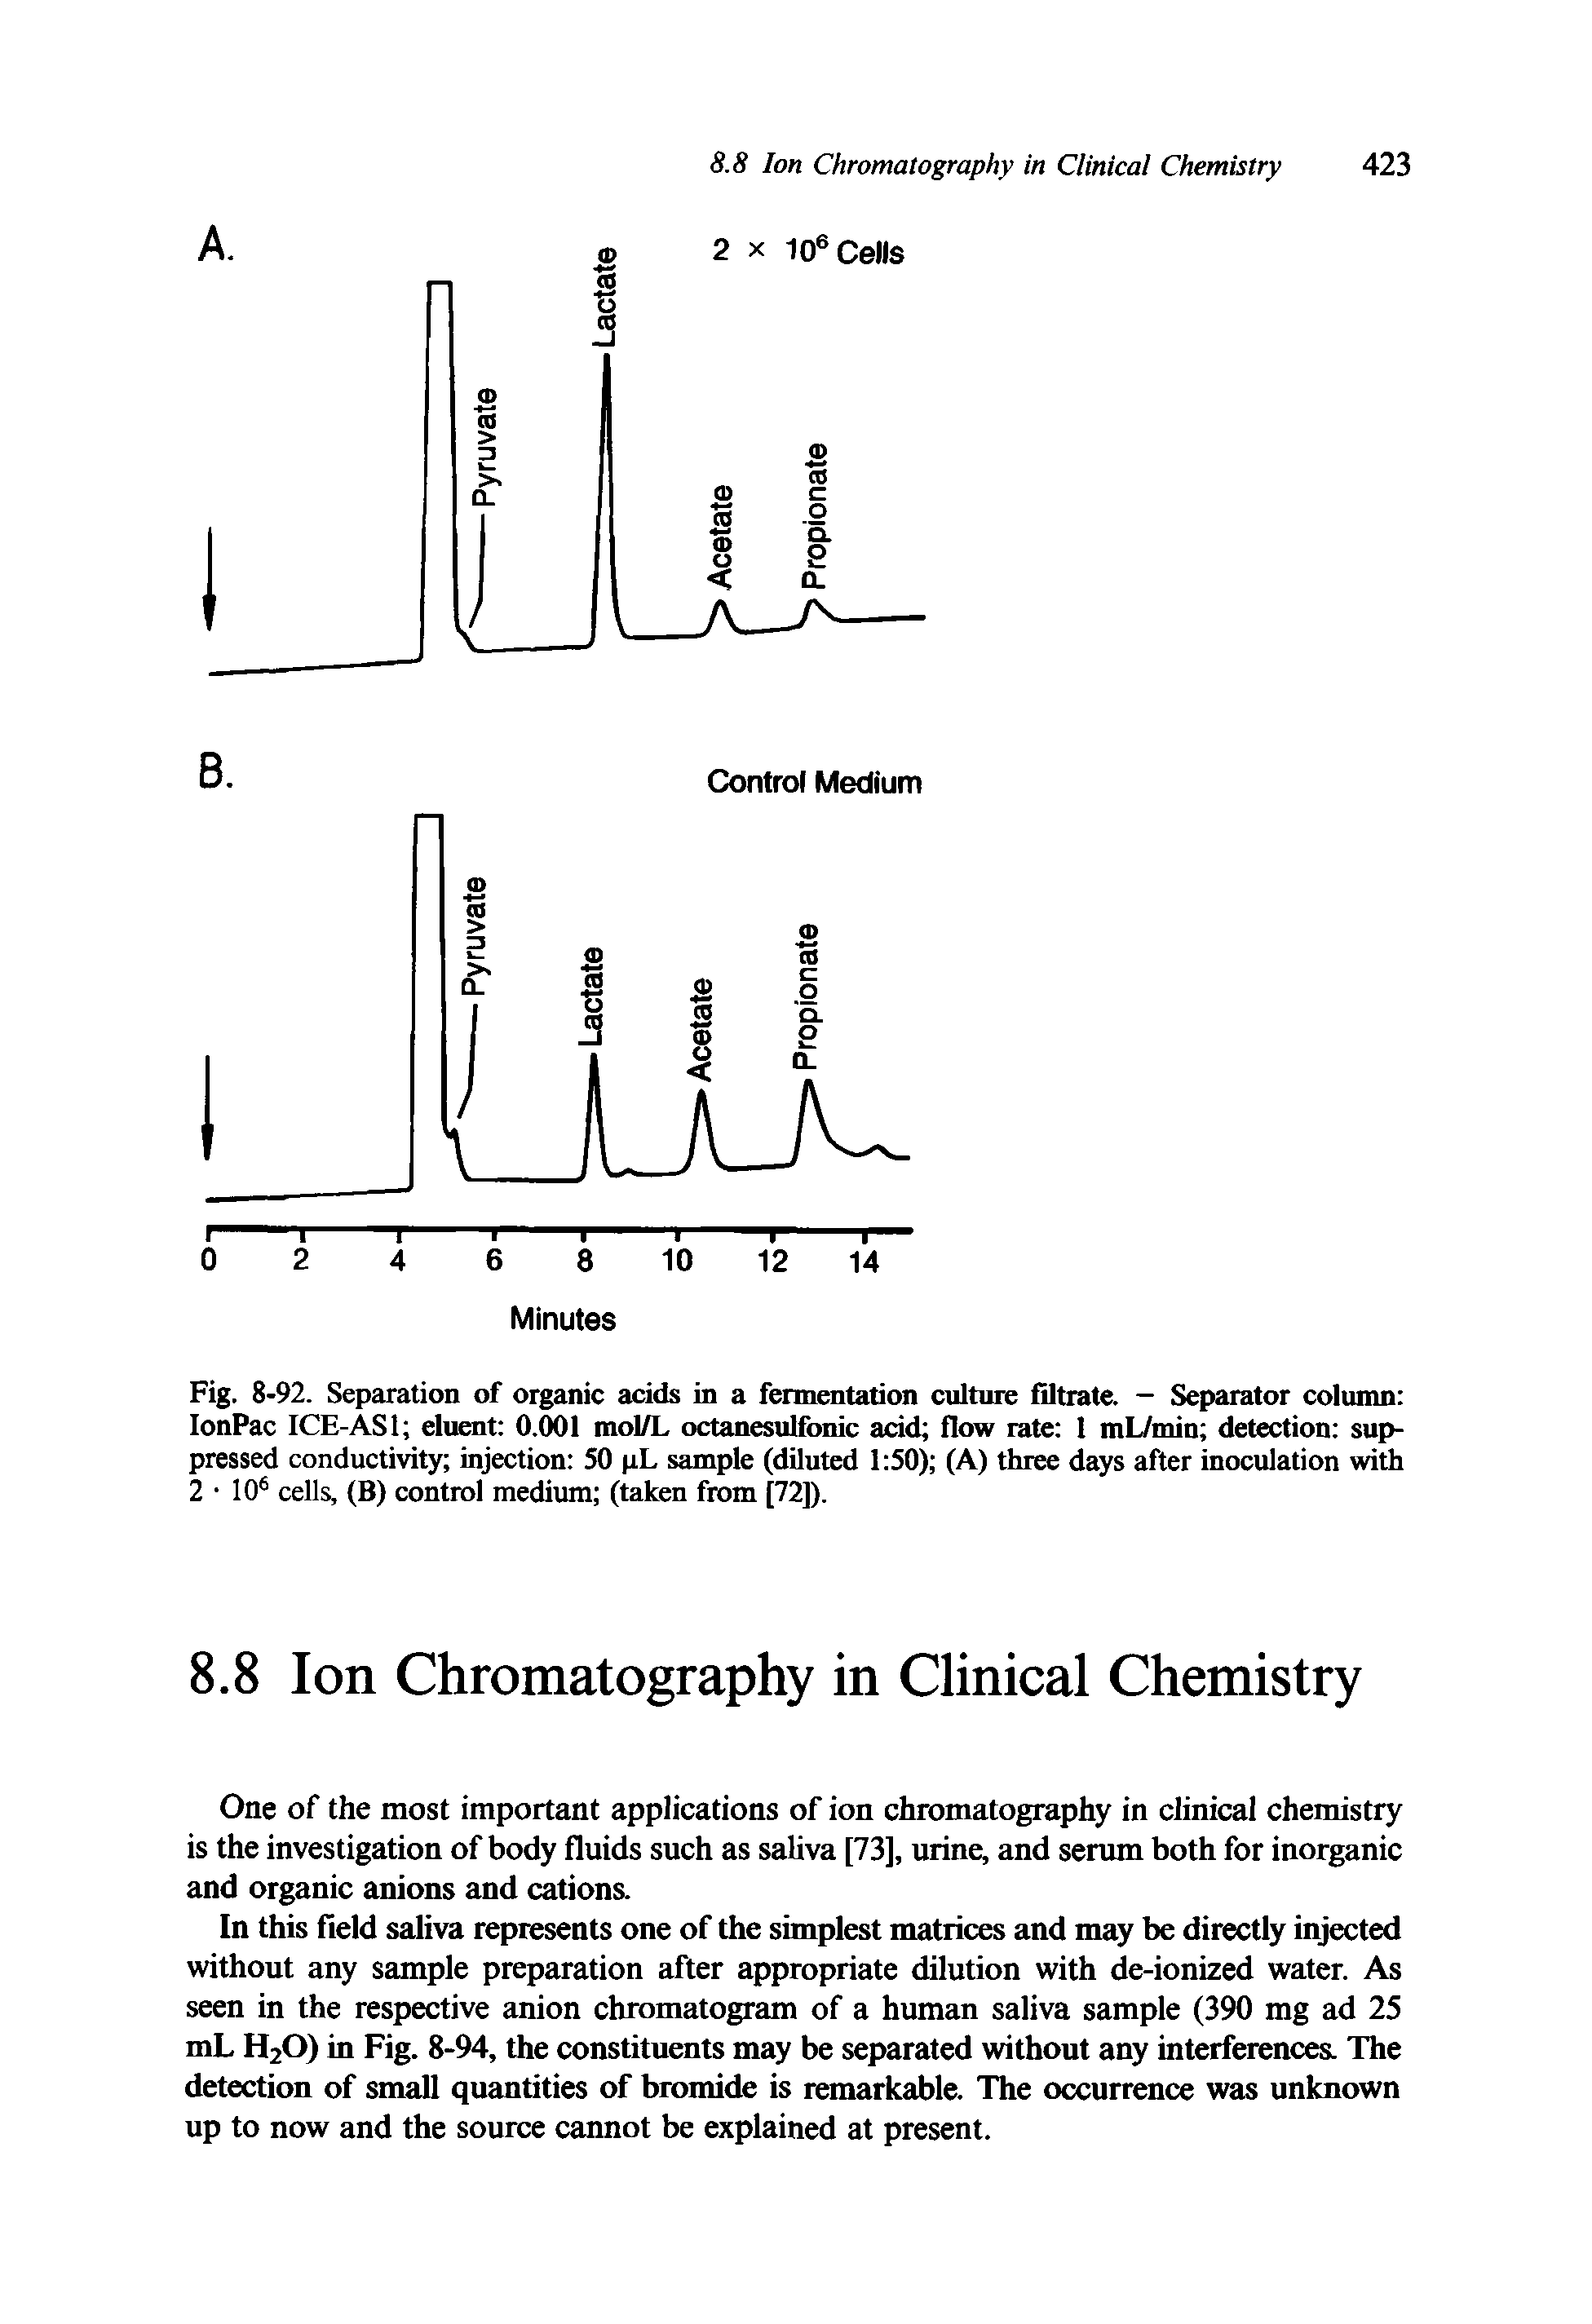 Fig. 8-92. Separation of organic acids in a fermentation culture filtrate. — Separator column IonPac ICE-AS1 eluent 0.001 mol/L octanesulfonic acid flow rate 1 mL/min detection suppressed conductivity injection 50 pL sample (diluted 1 50) (A) three days after inoculation with 2 106 cells, (B) control medium (taken from [72]).